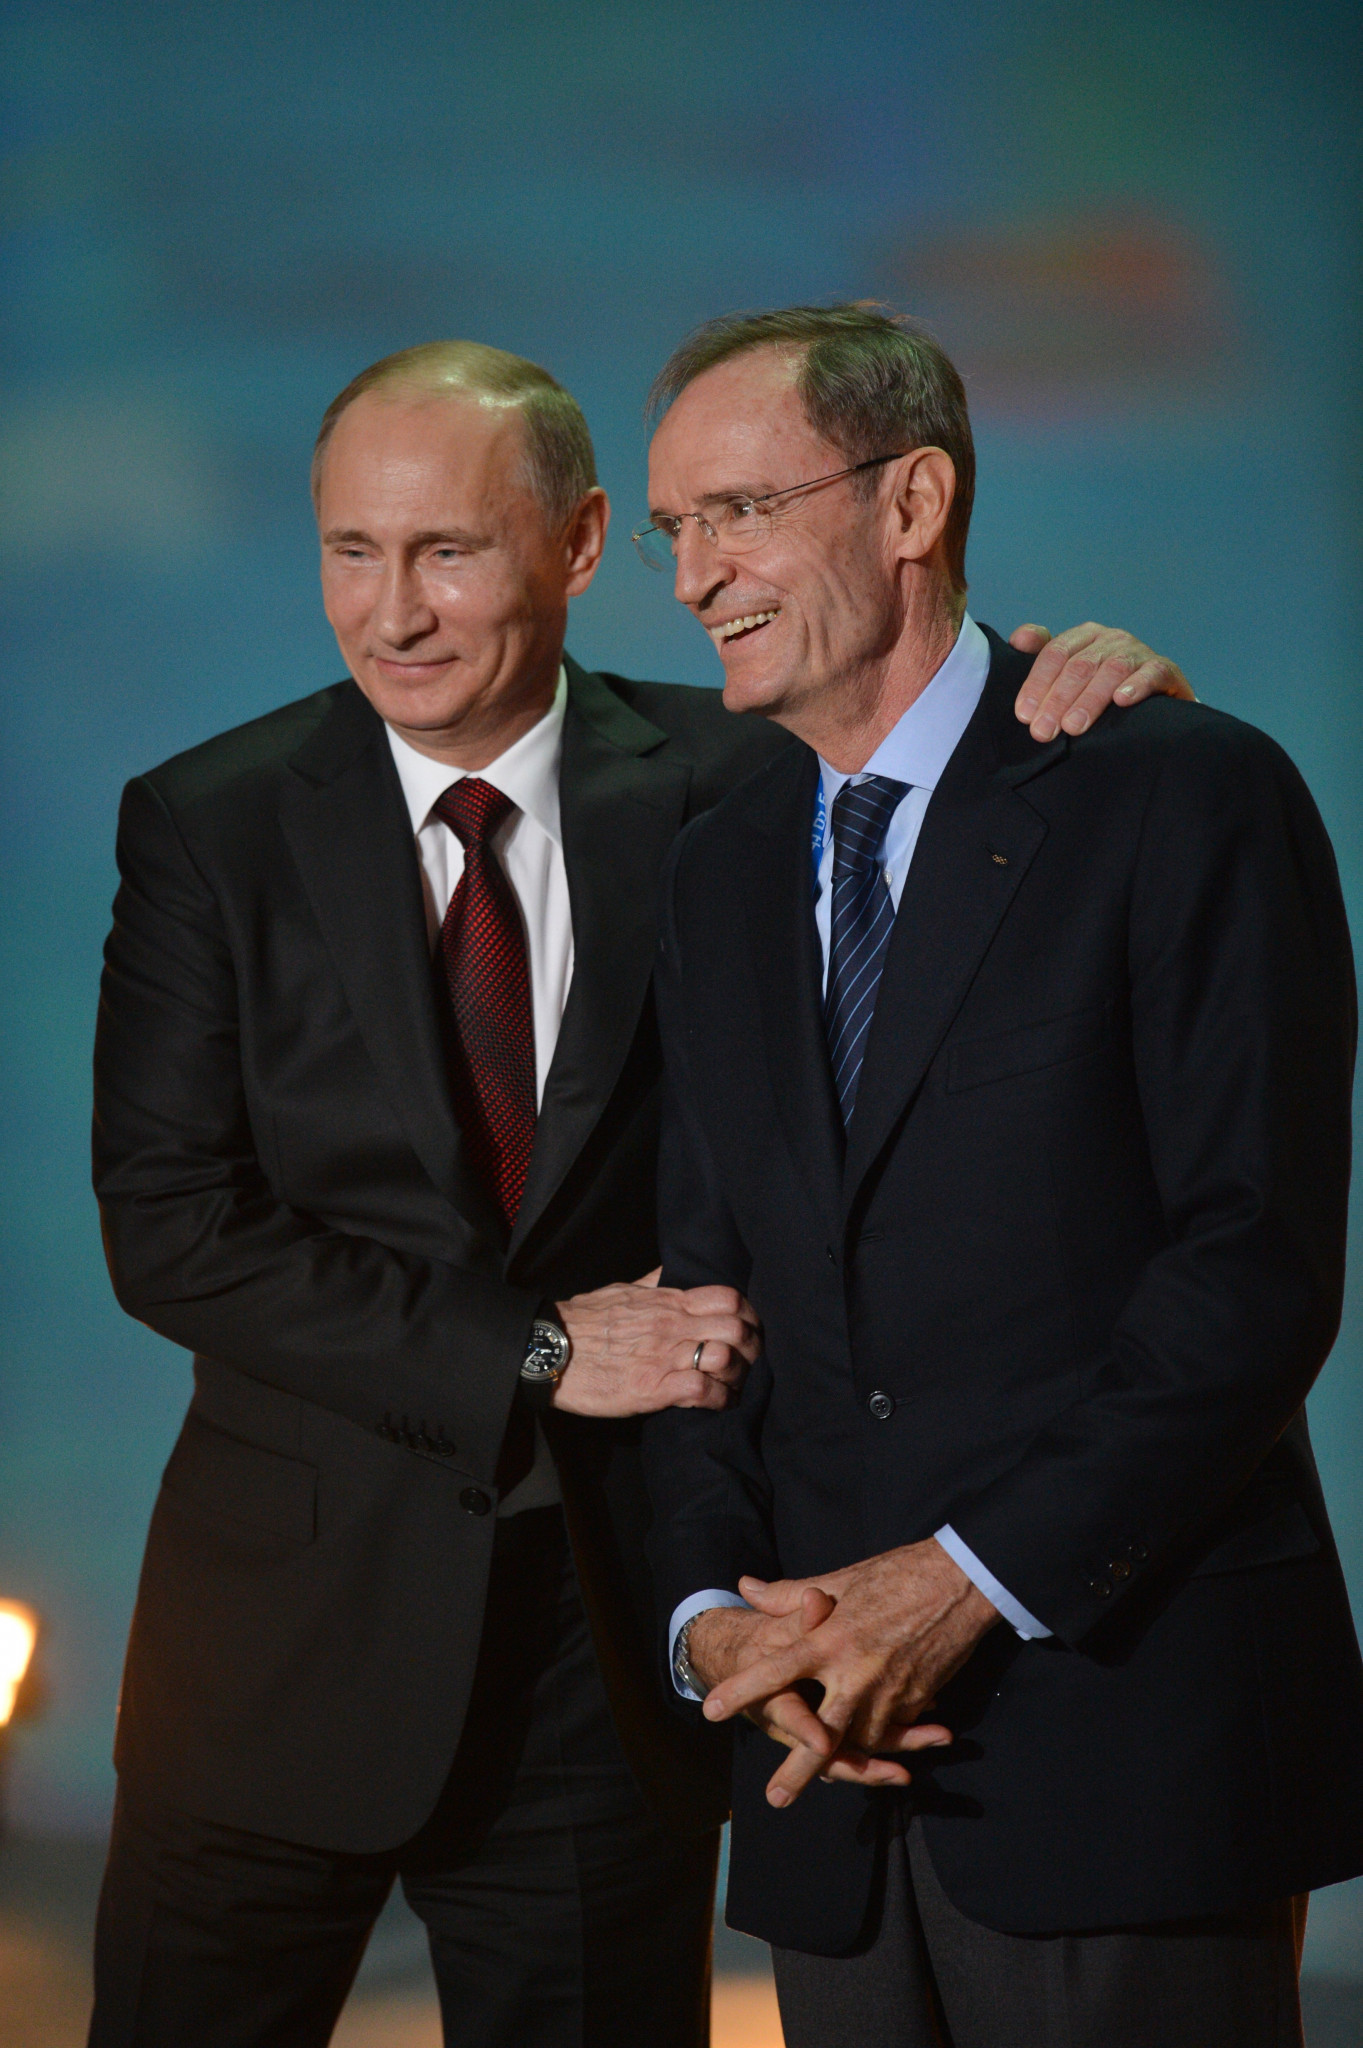 Jean-Claude Killy pictured with Russian President Vladimir Putin during the preparations for the 2014 Winter Olympic and Paralympic Games in Sochi, for which the Frenchman chaired the IOC Coordination Commission ©Getty Images